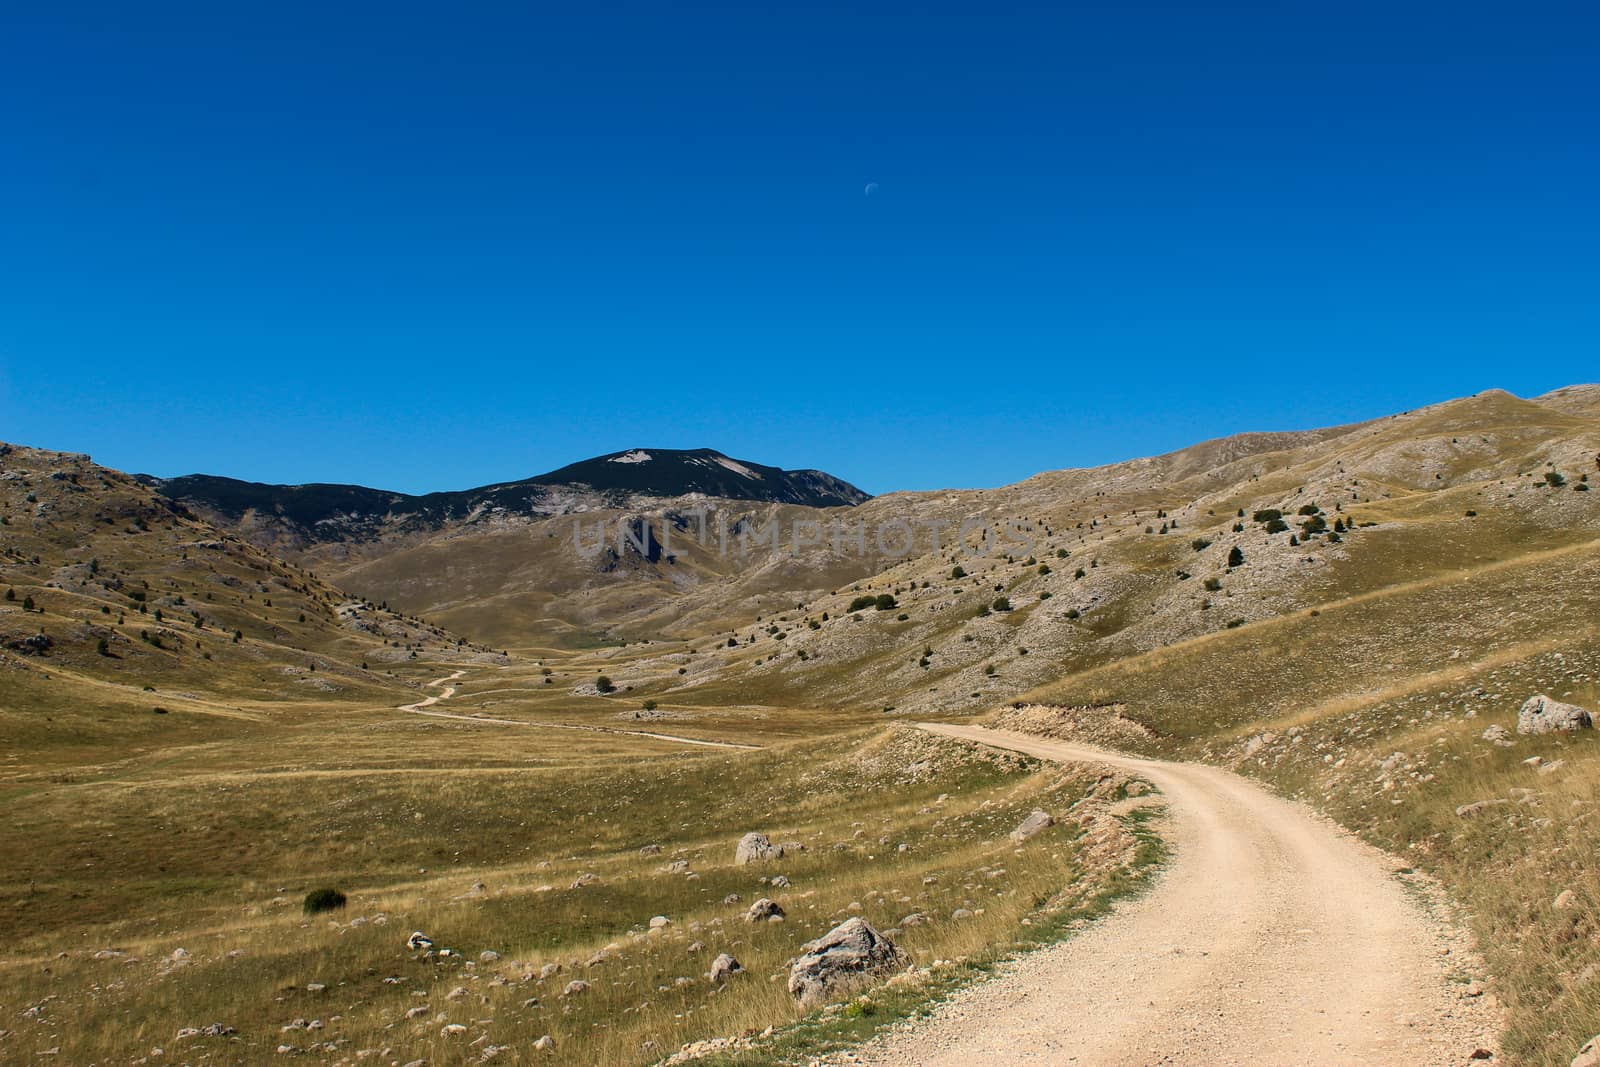 Old mountain road, rocky landscape, mountain top in the background with blue sky and moon. Autumn view of the Bjelasnica Mountain, Bosnia and Herzegovina.